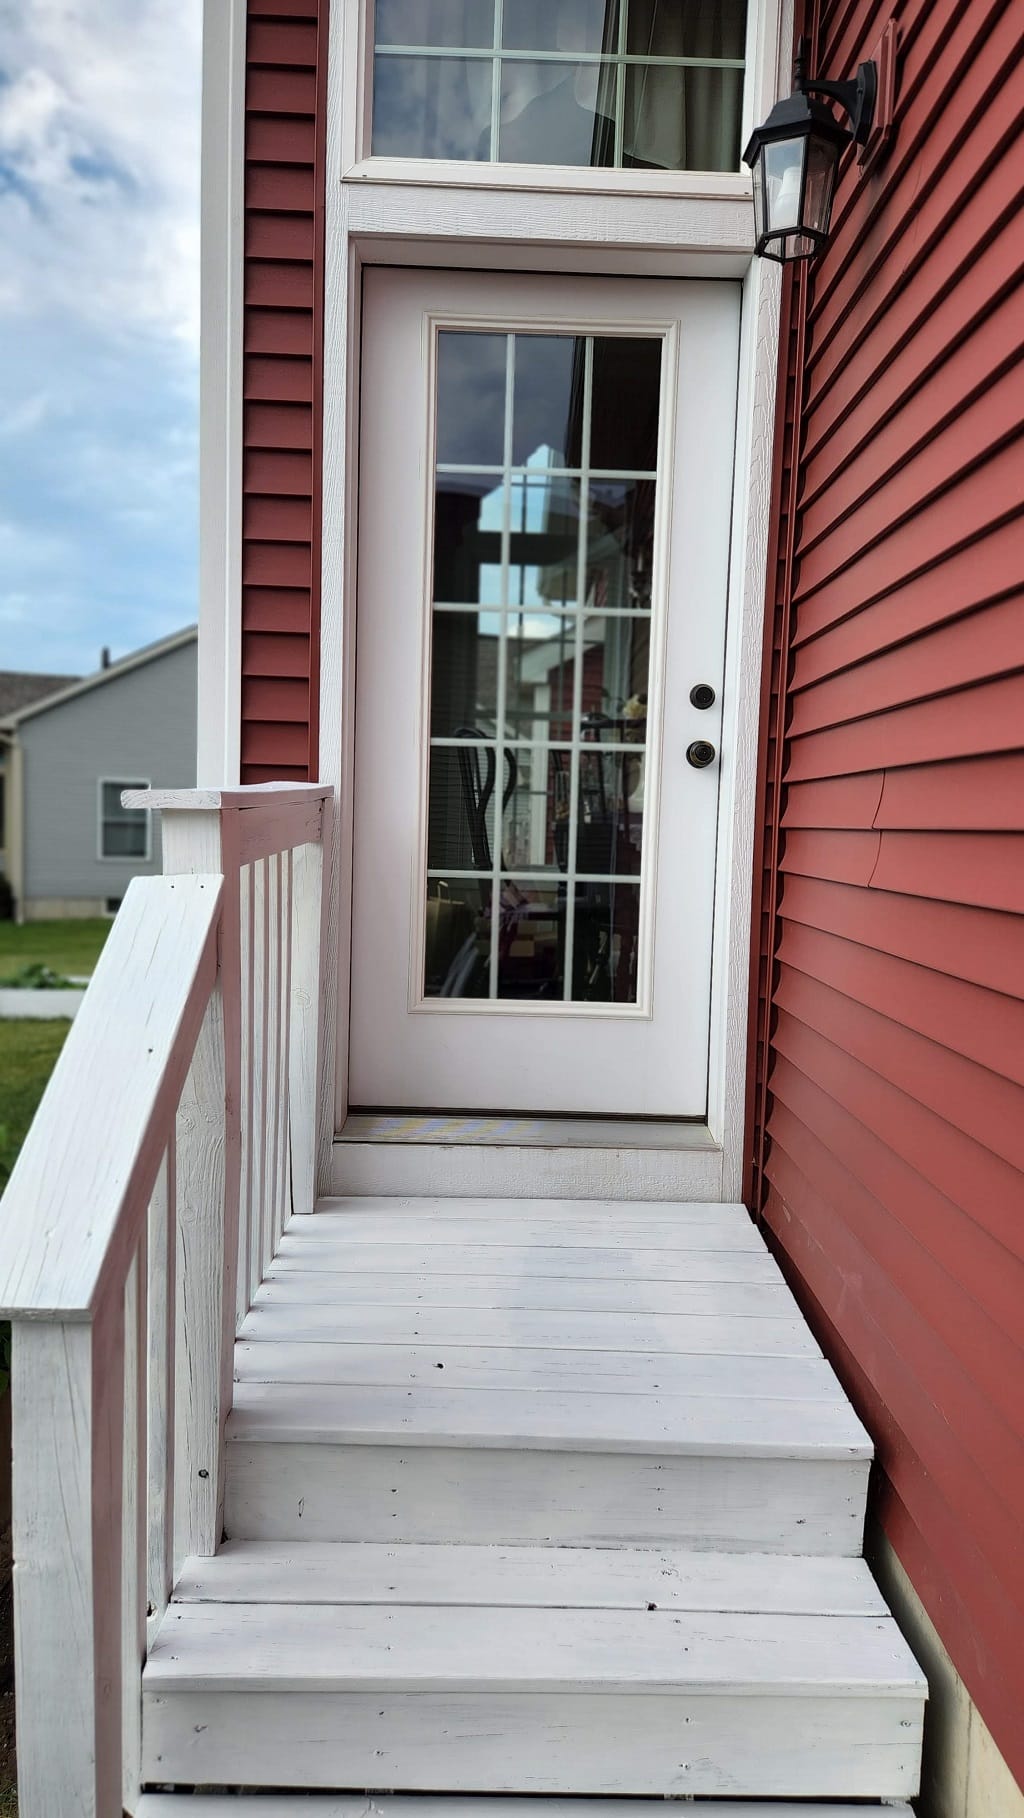 How to Paint Wooden Porch Steps in 4 Easy Steps